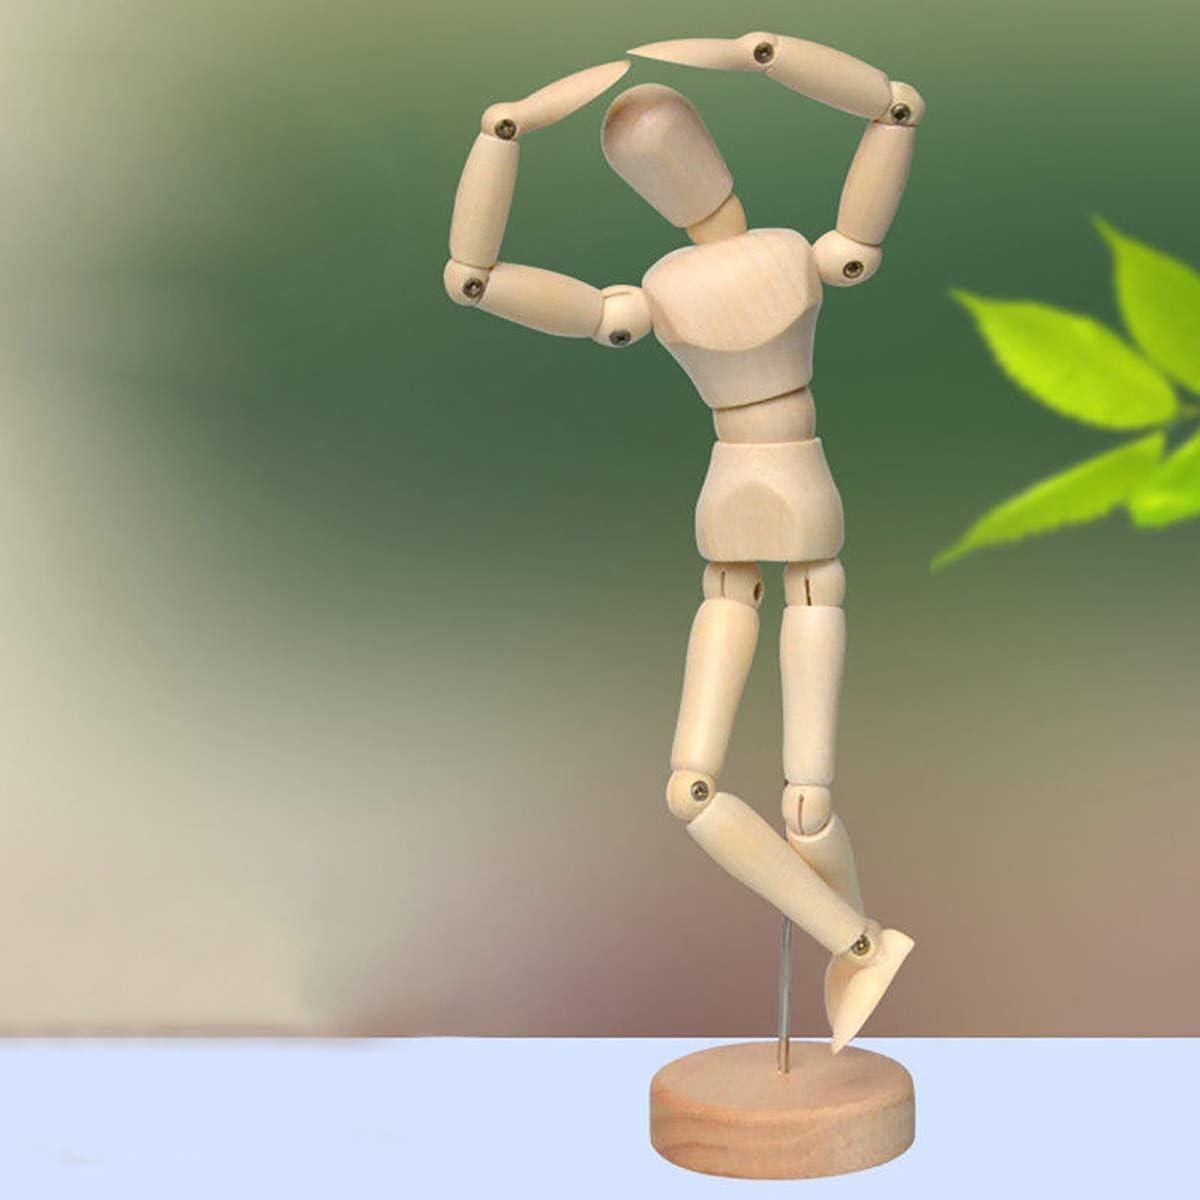 Wooden mannequin with joints in different poses Vector Image, Wooden  Mannequin